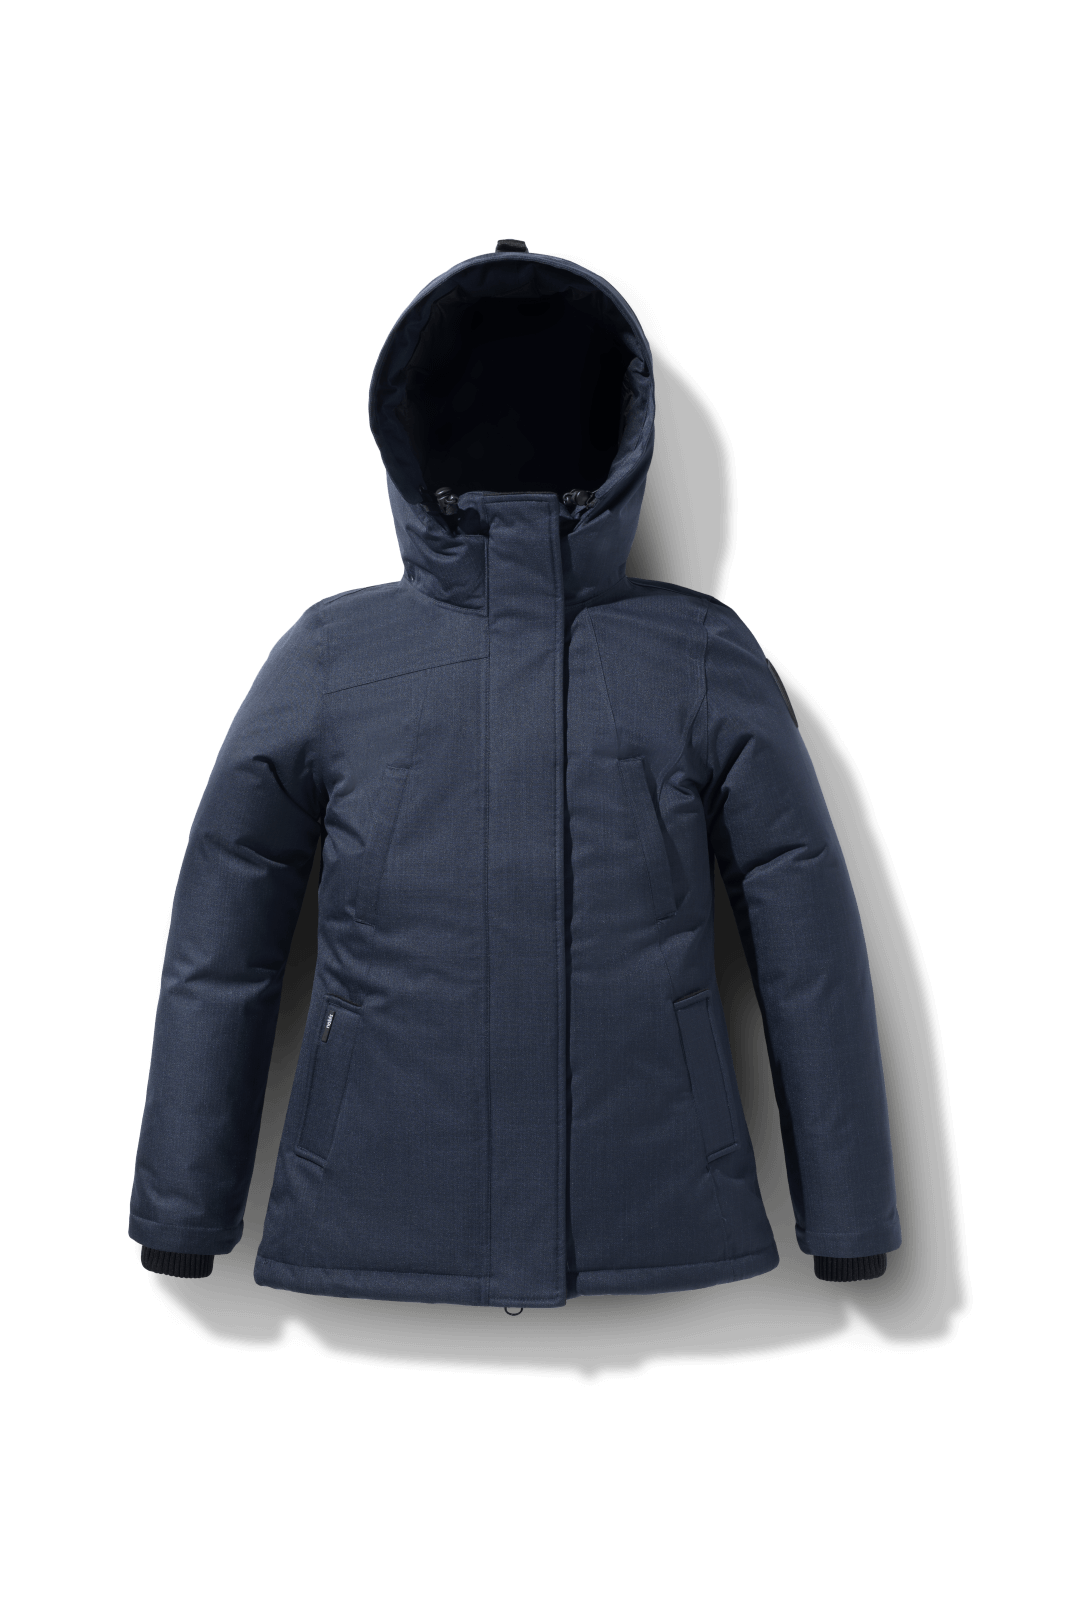 Women's hip length down filled parka with non-removable hood in CH Navy